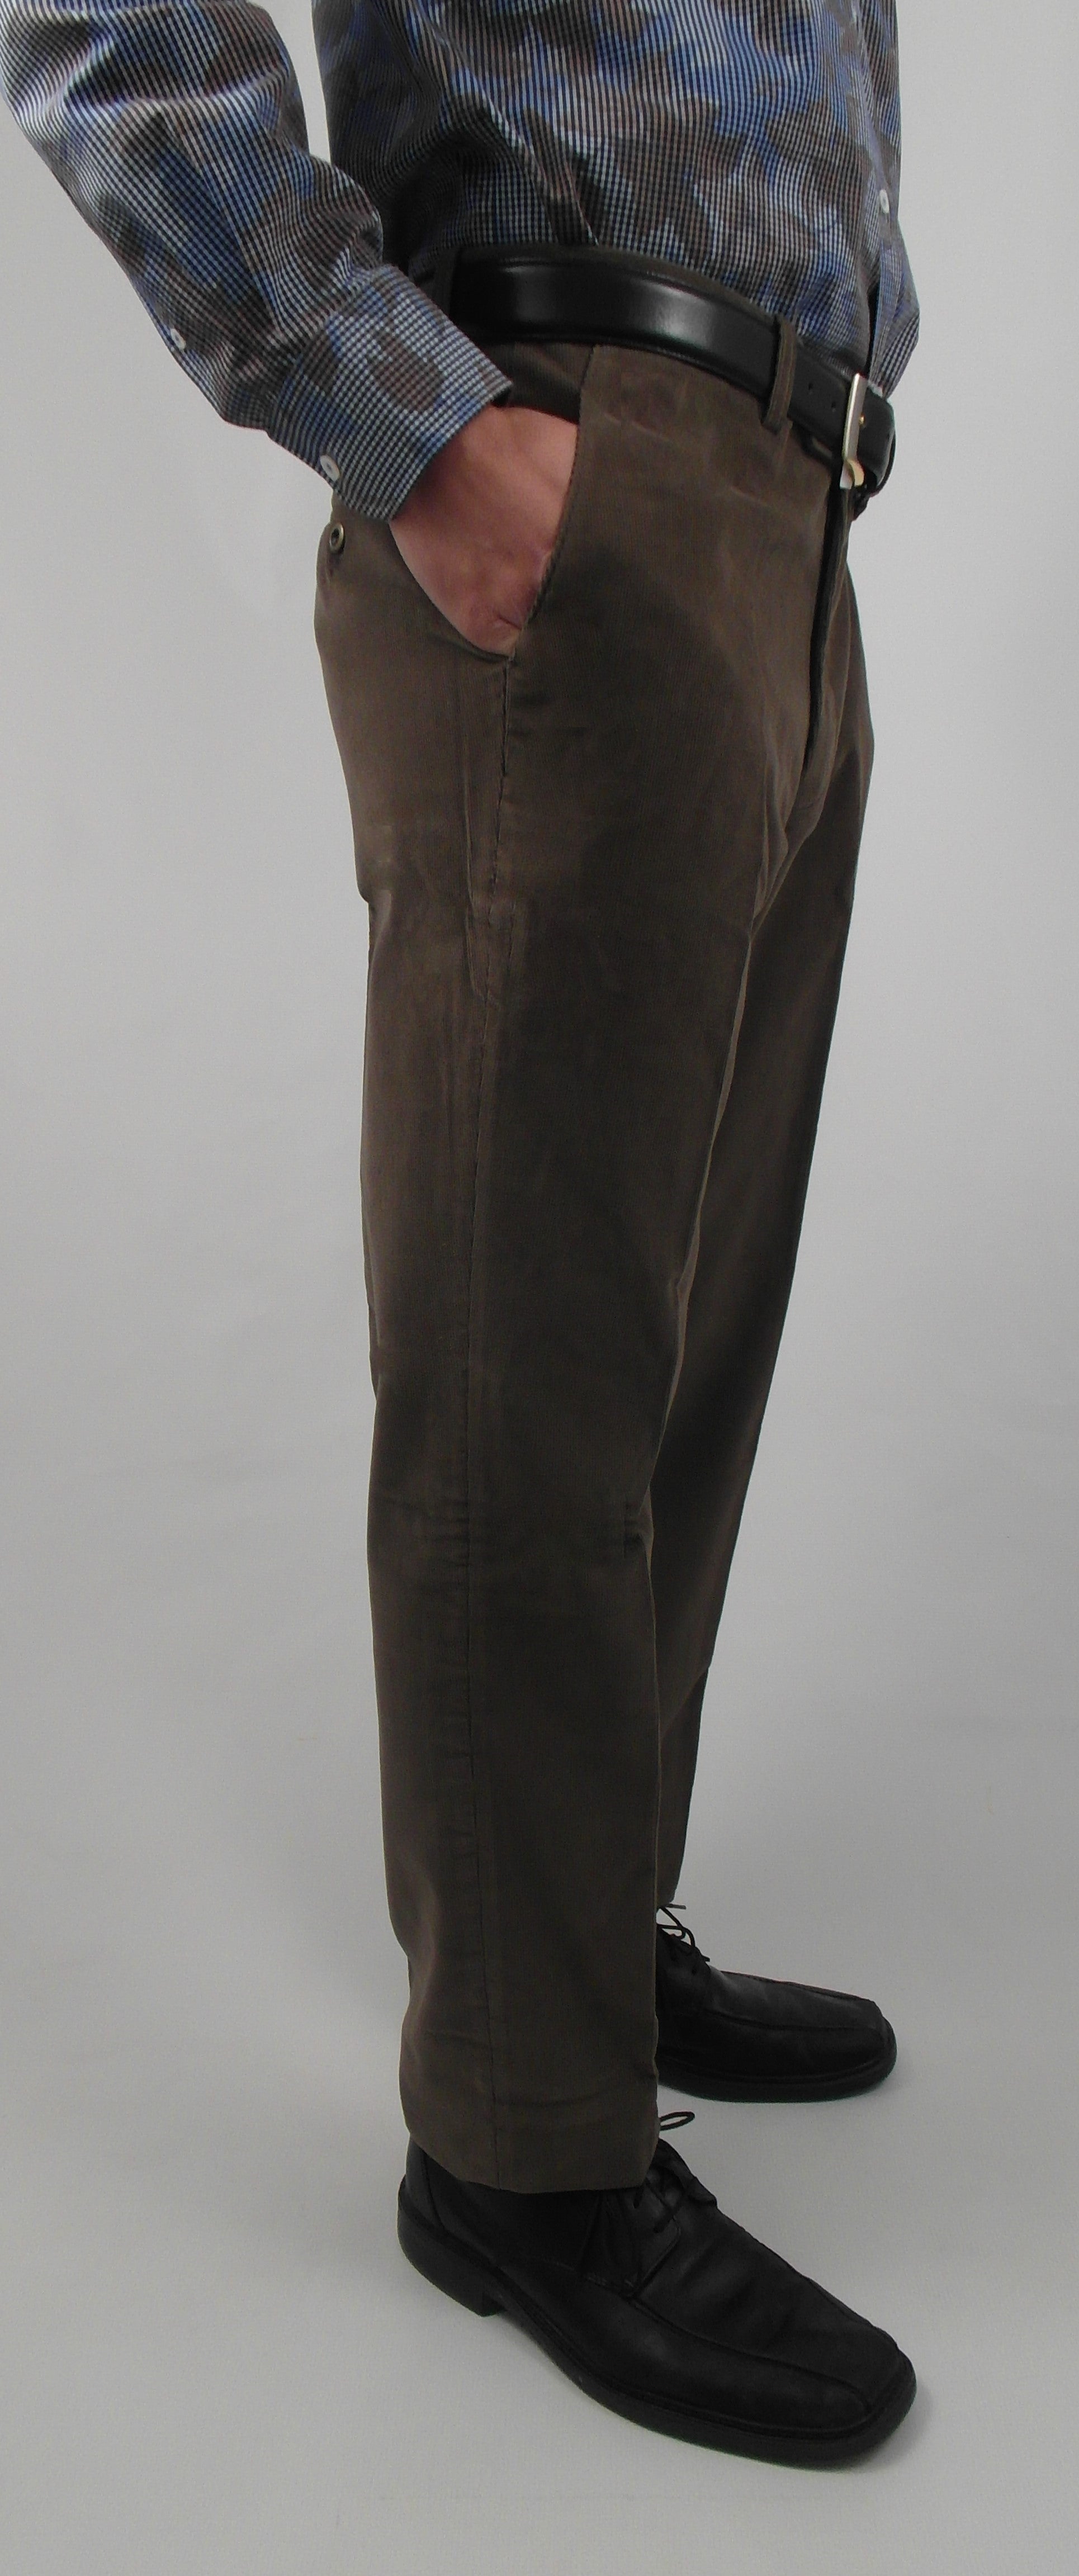 Gala - C2 - Stretch Corduroy Pant - plain front - Available in 7